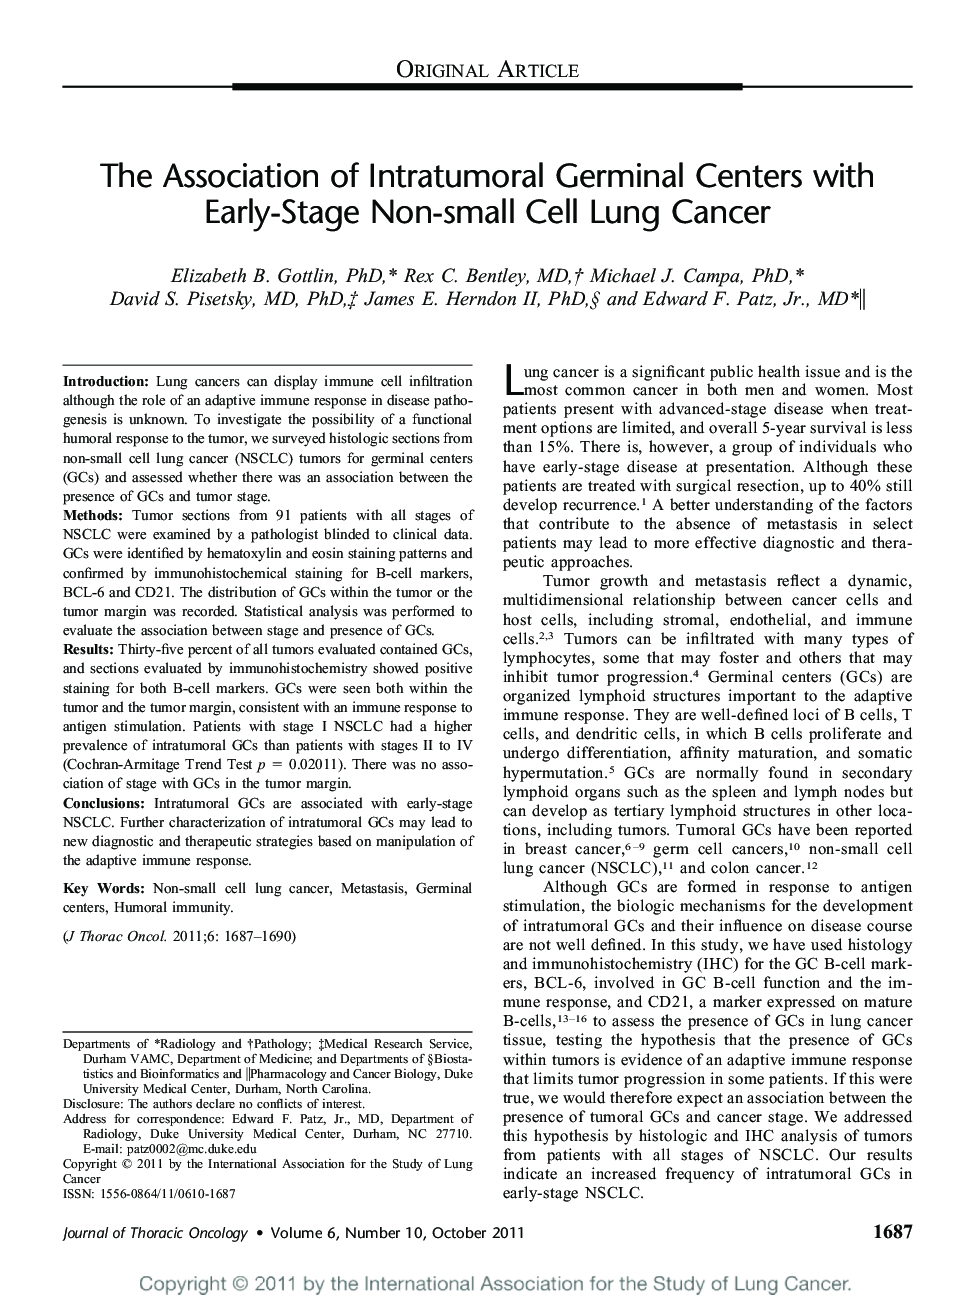 The Association of Intratumoral Germinal Centers with Early-Stage Non-small Cell Lung Cancer 